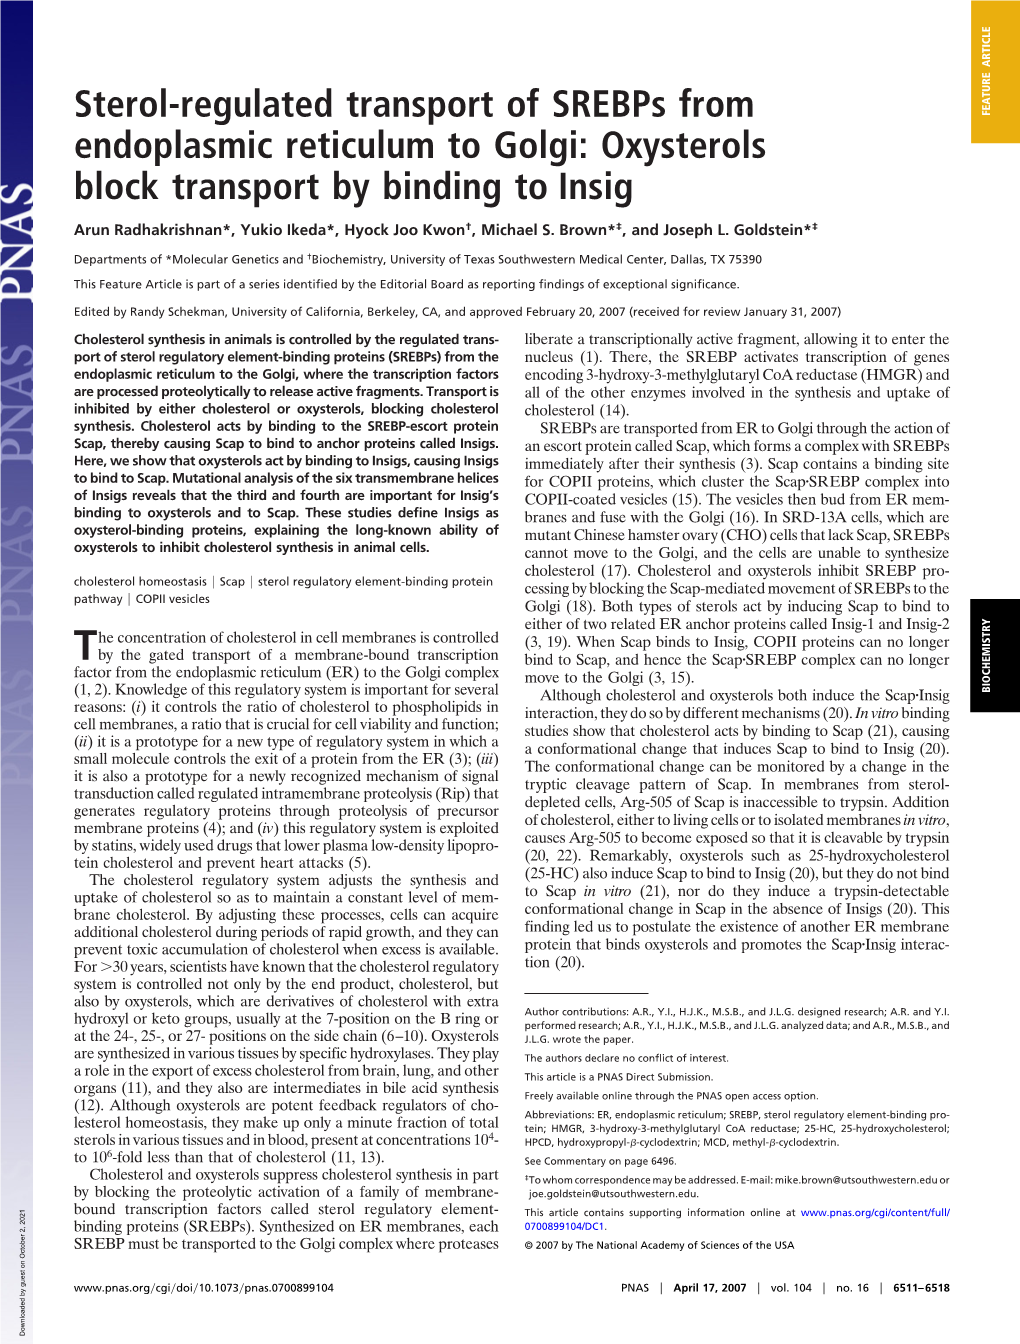 Oxysterols Block Transport by Binding to Insig